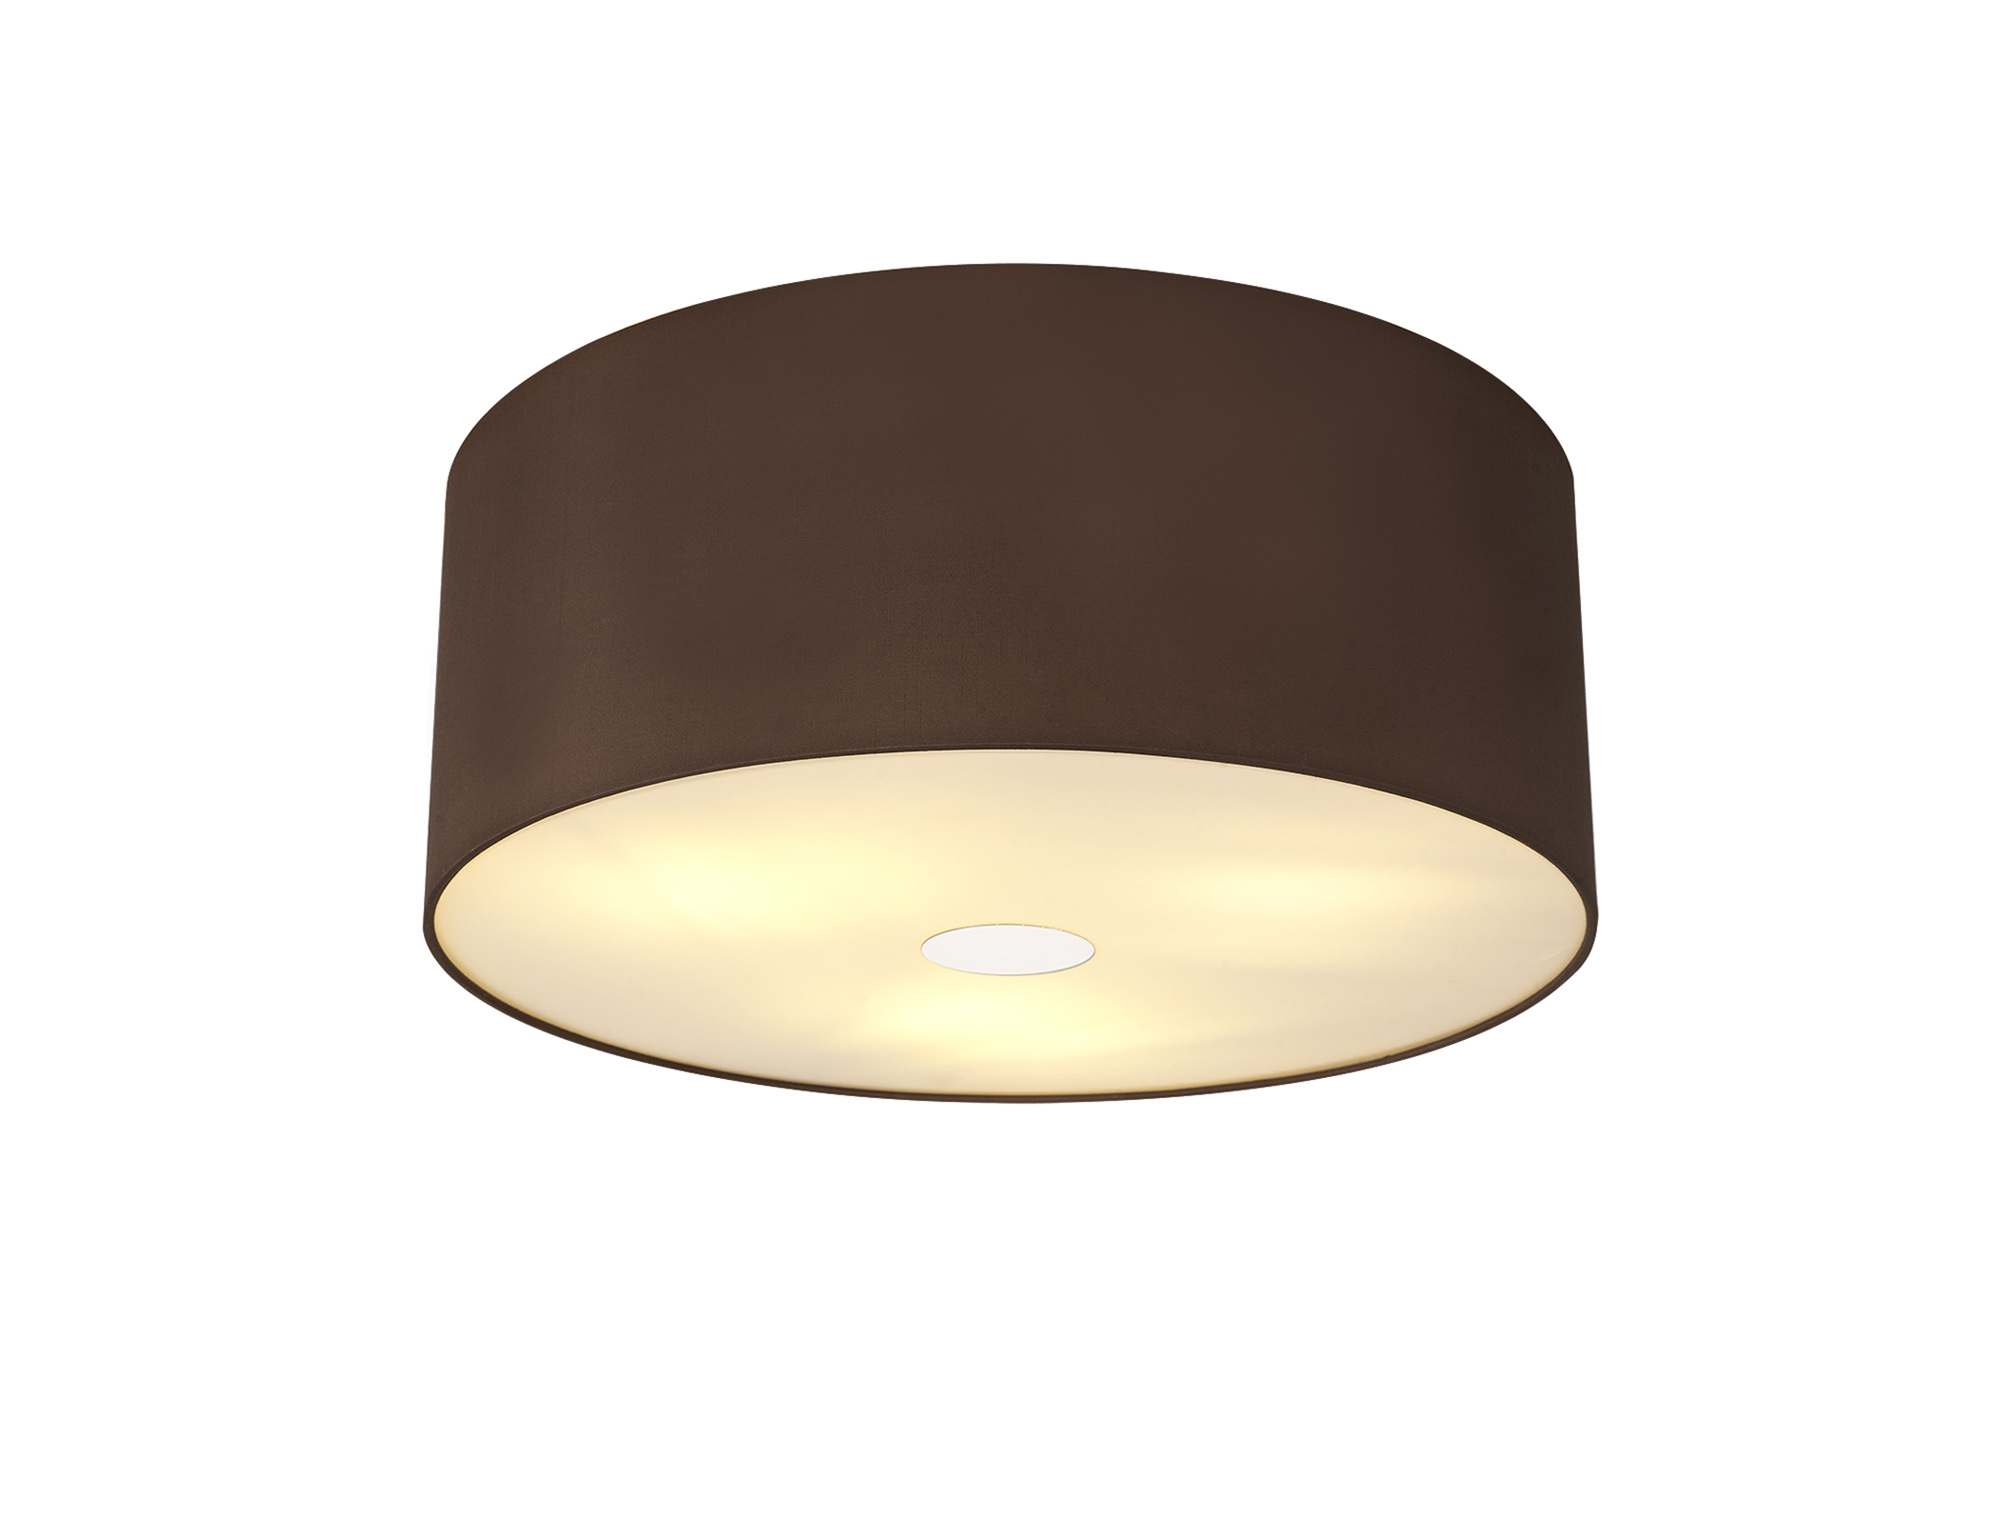 DK0362  Baymont 50cm, Flush 3 Light Polished Chrome, Raw Cocoa/Grecian Bronze, Frosted Diffuser